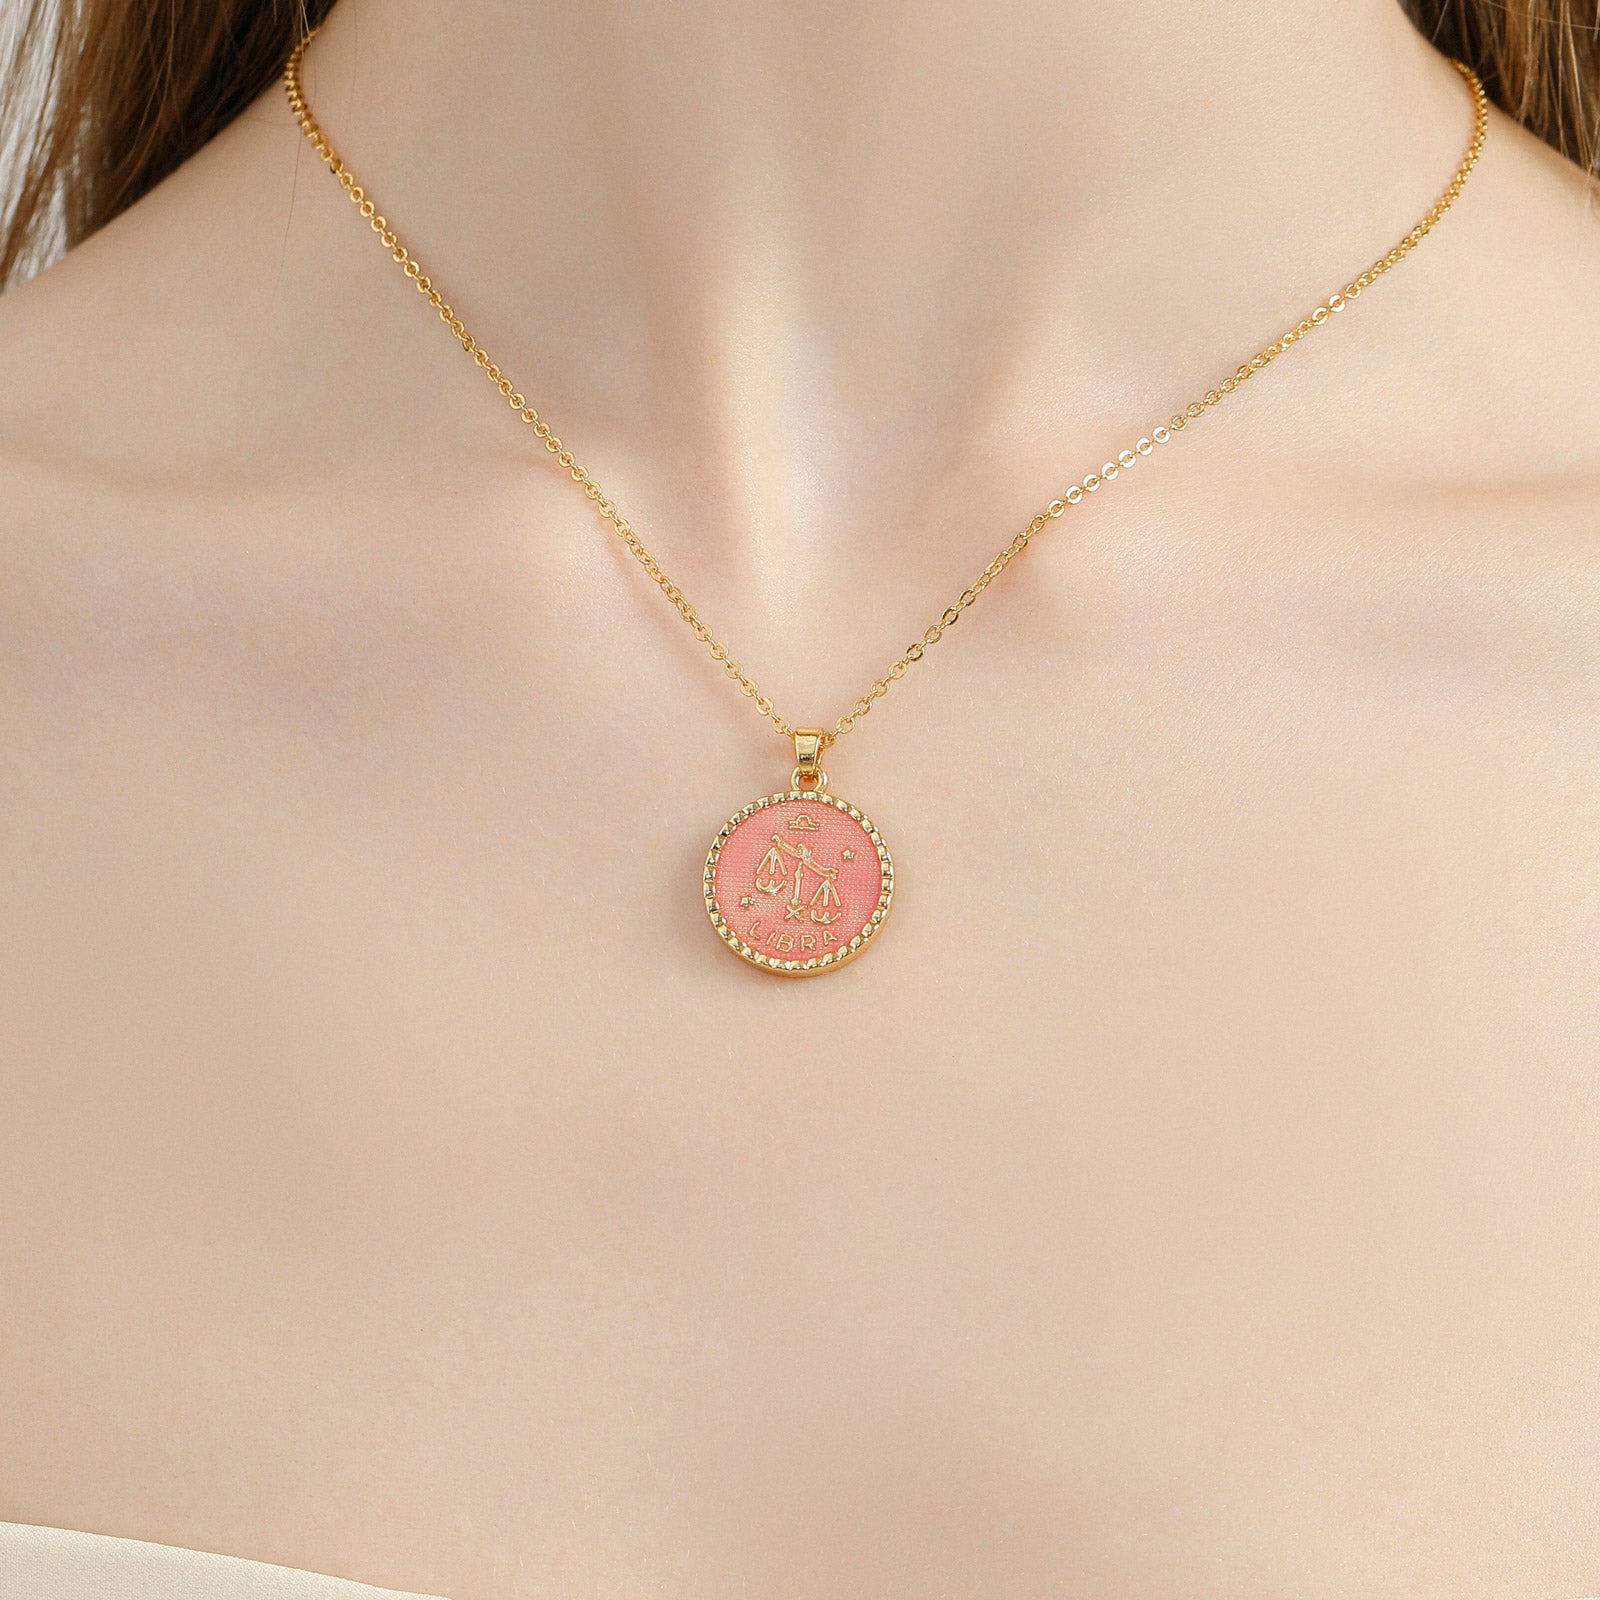 Libra Constellation Necklace Astrology Jewelry